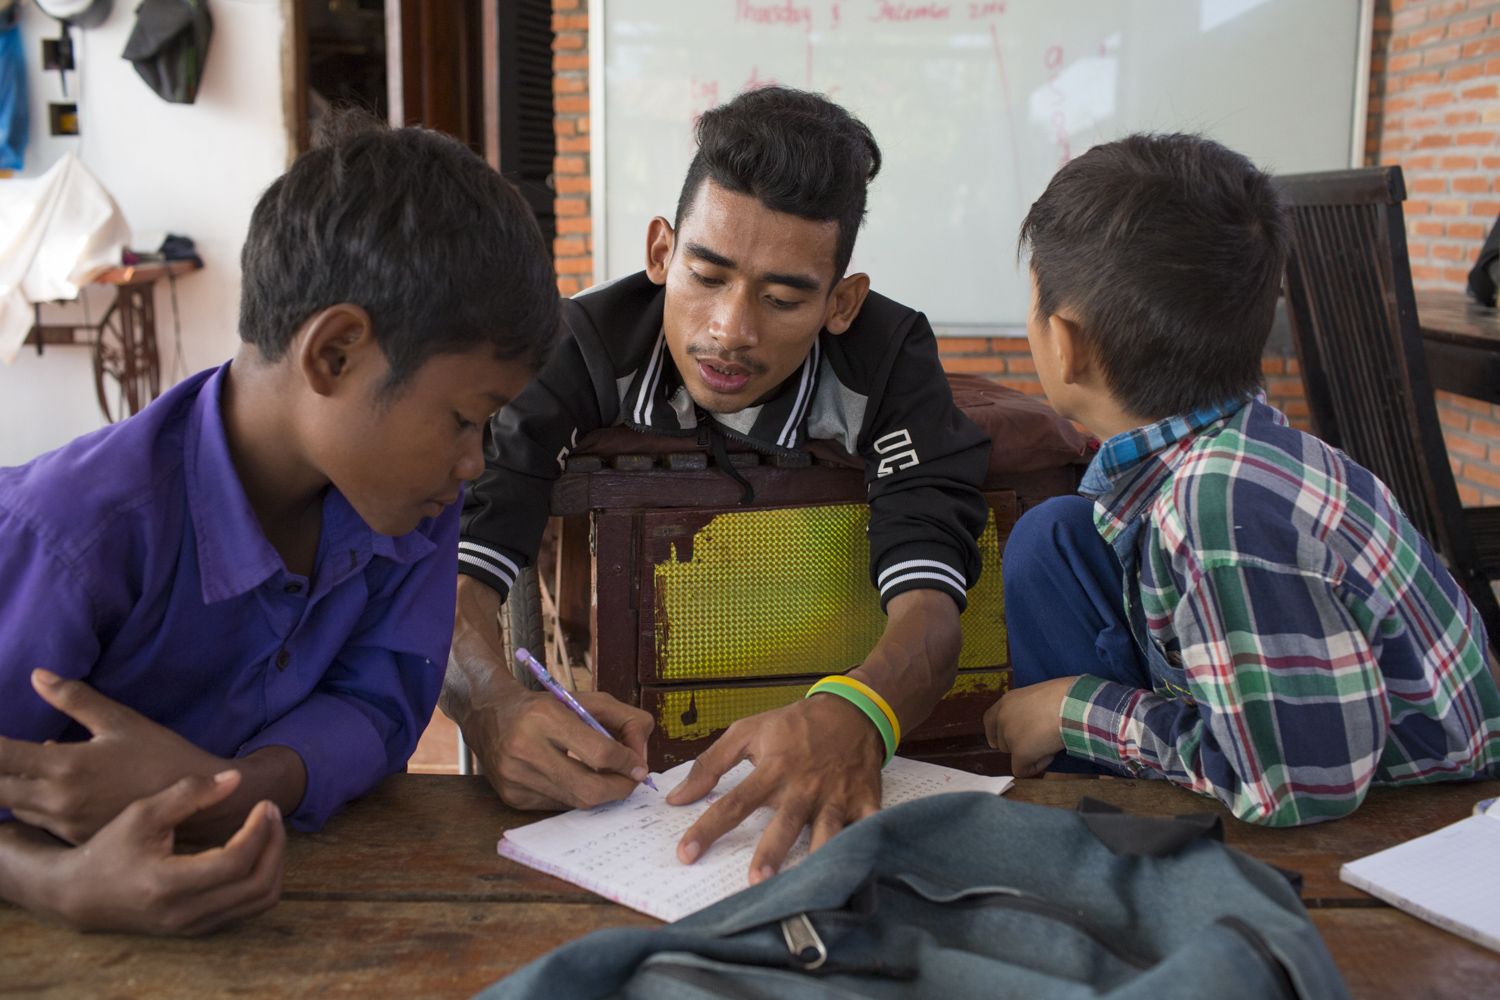 Sophanna loves teaching, and feels it’s important to give back to the community wherever possible. Having picked up English at the orphanage he grew up in, he teaches simple alphabets and words to a group of 6 to 7 students.